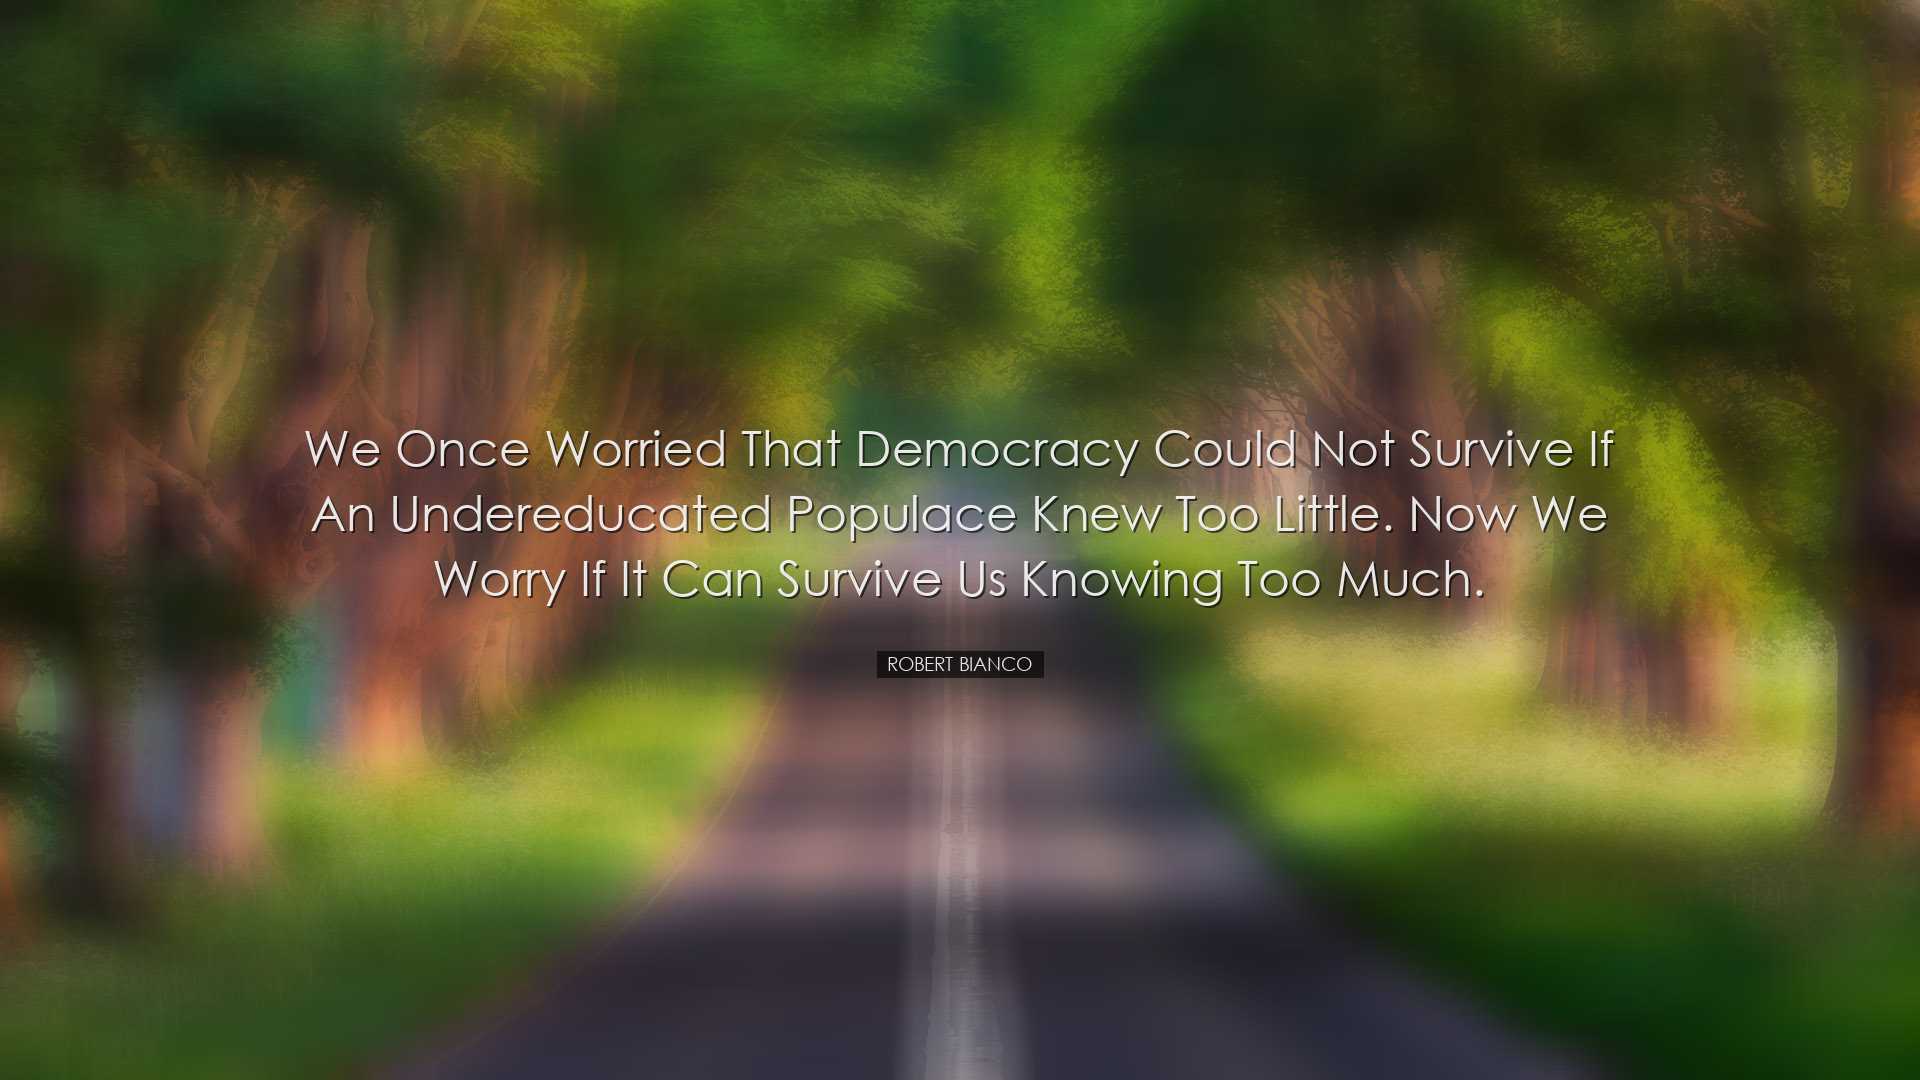 We once worried that democracy could not survive if an undereducat